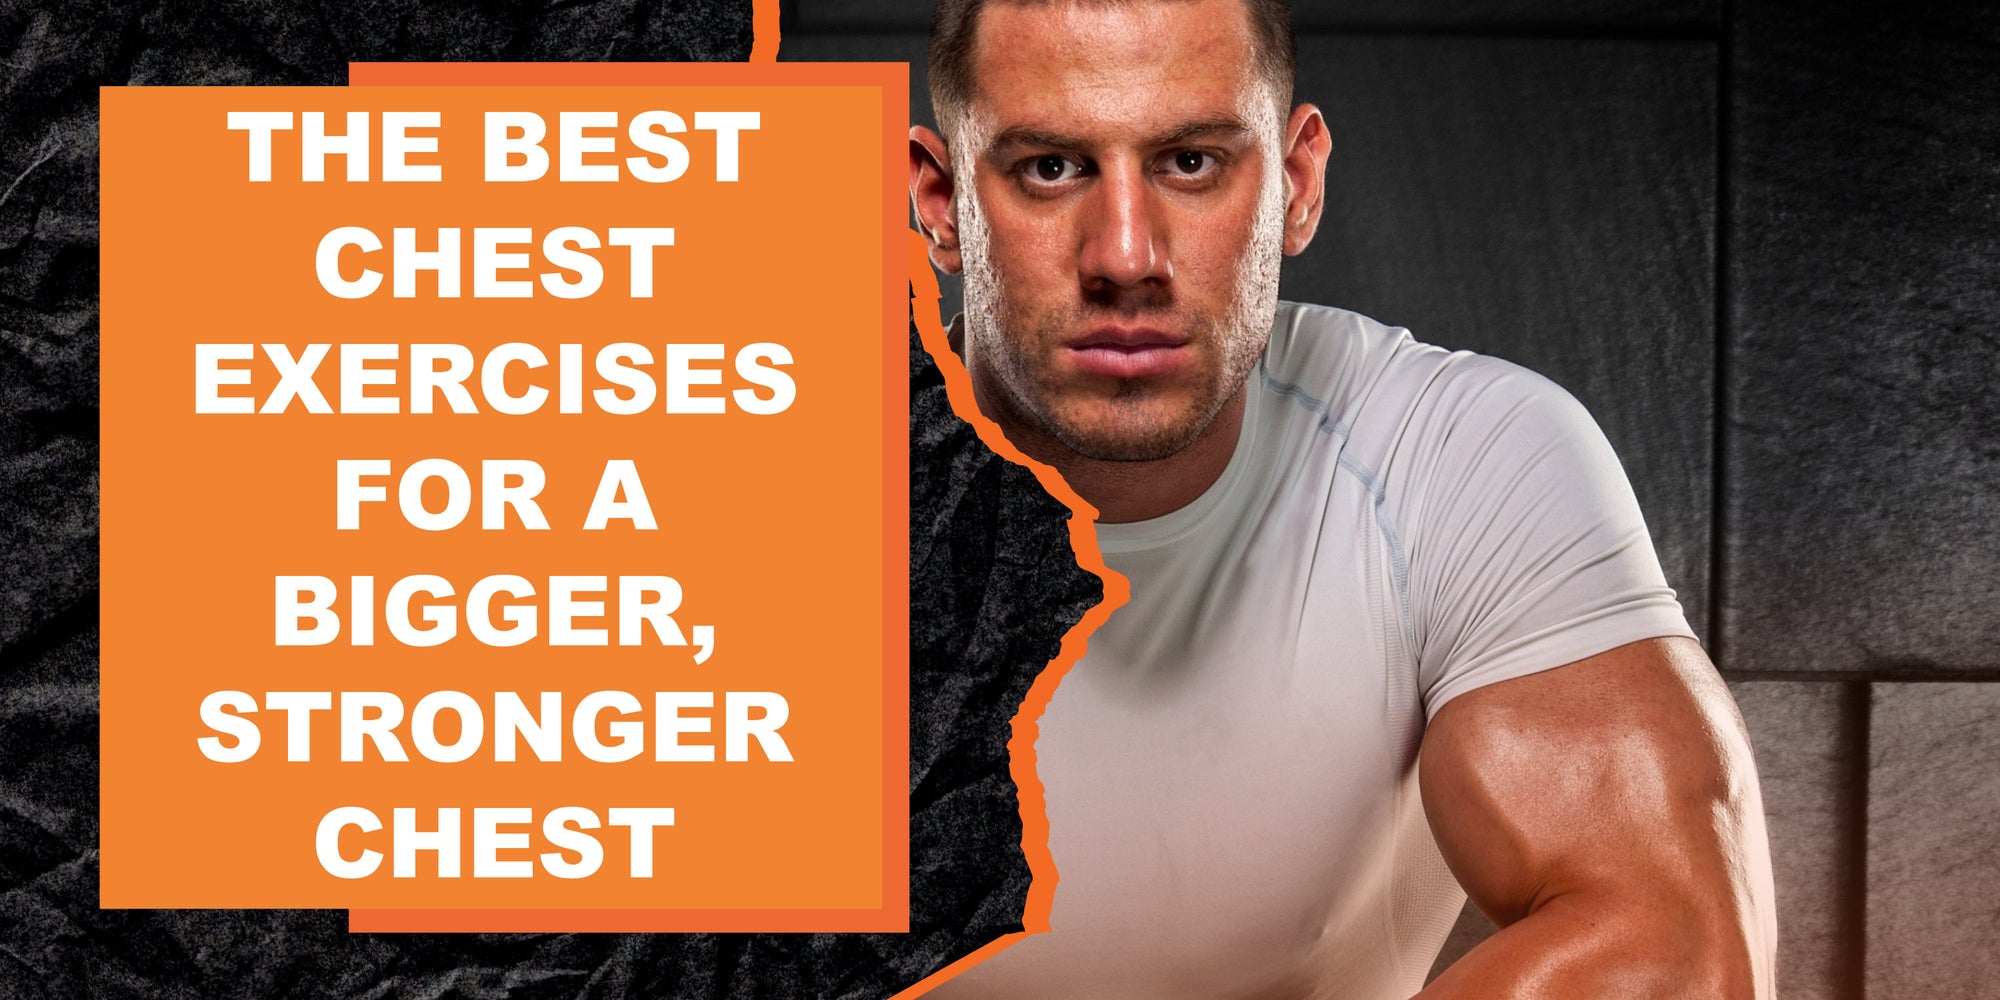 The Best Chest Exercises for a Bigger, Stronger Chest